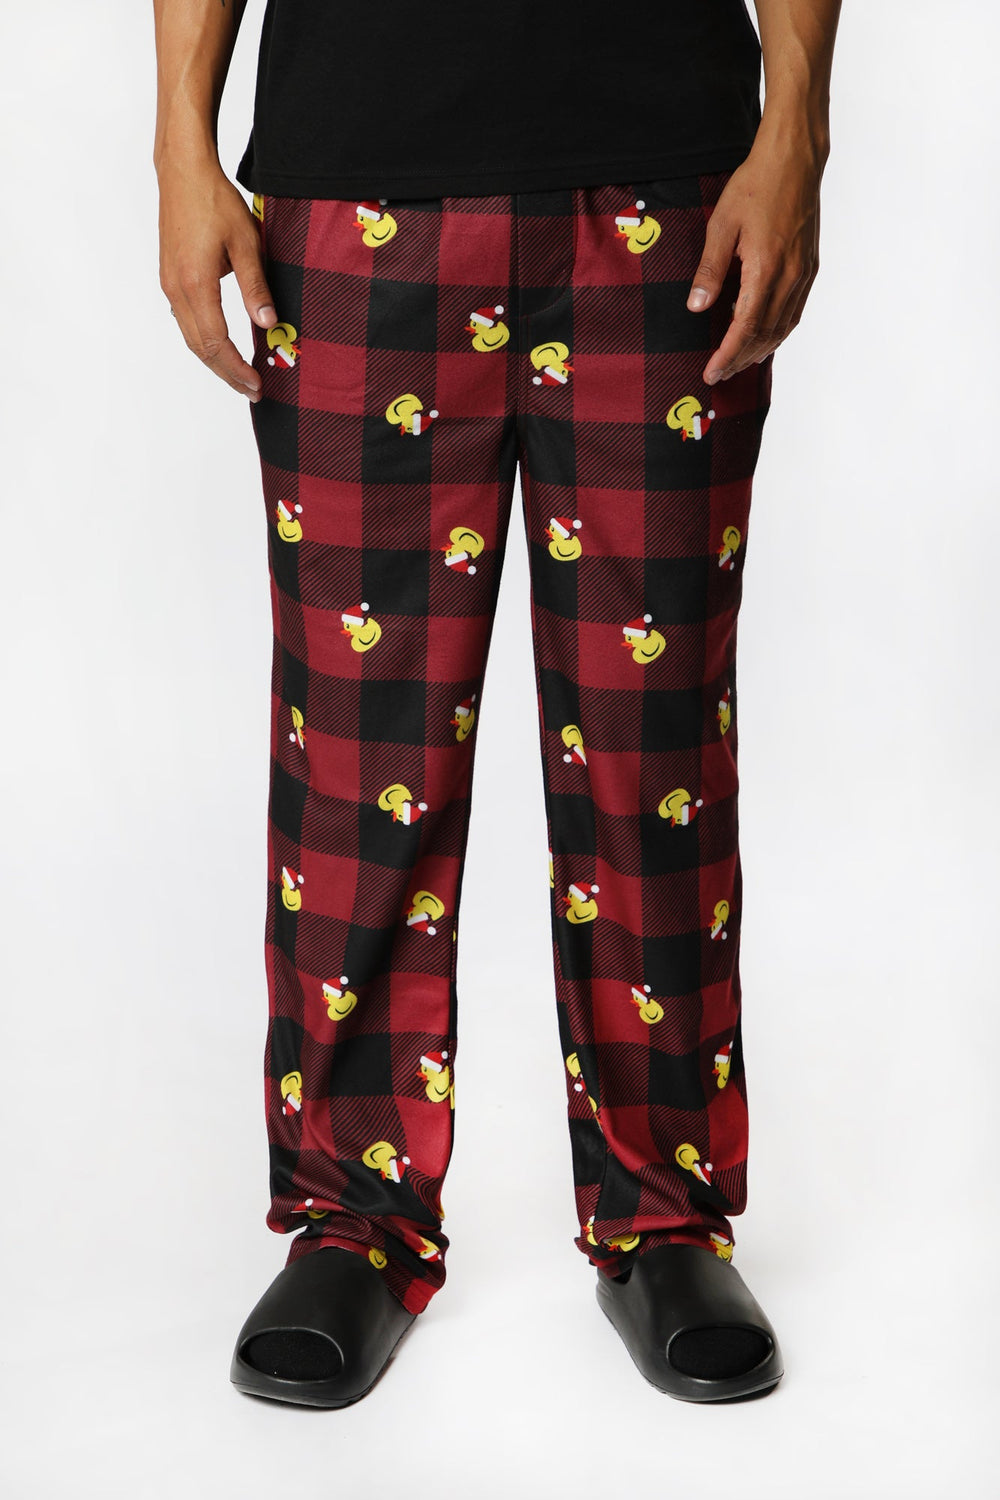 West49 Mens Holiday Duckies Pajama Bottoms West49 Mens Holiday Duckies Pajama Bottoms